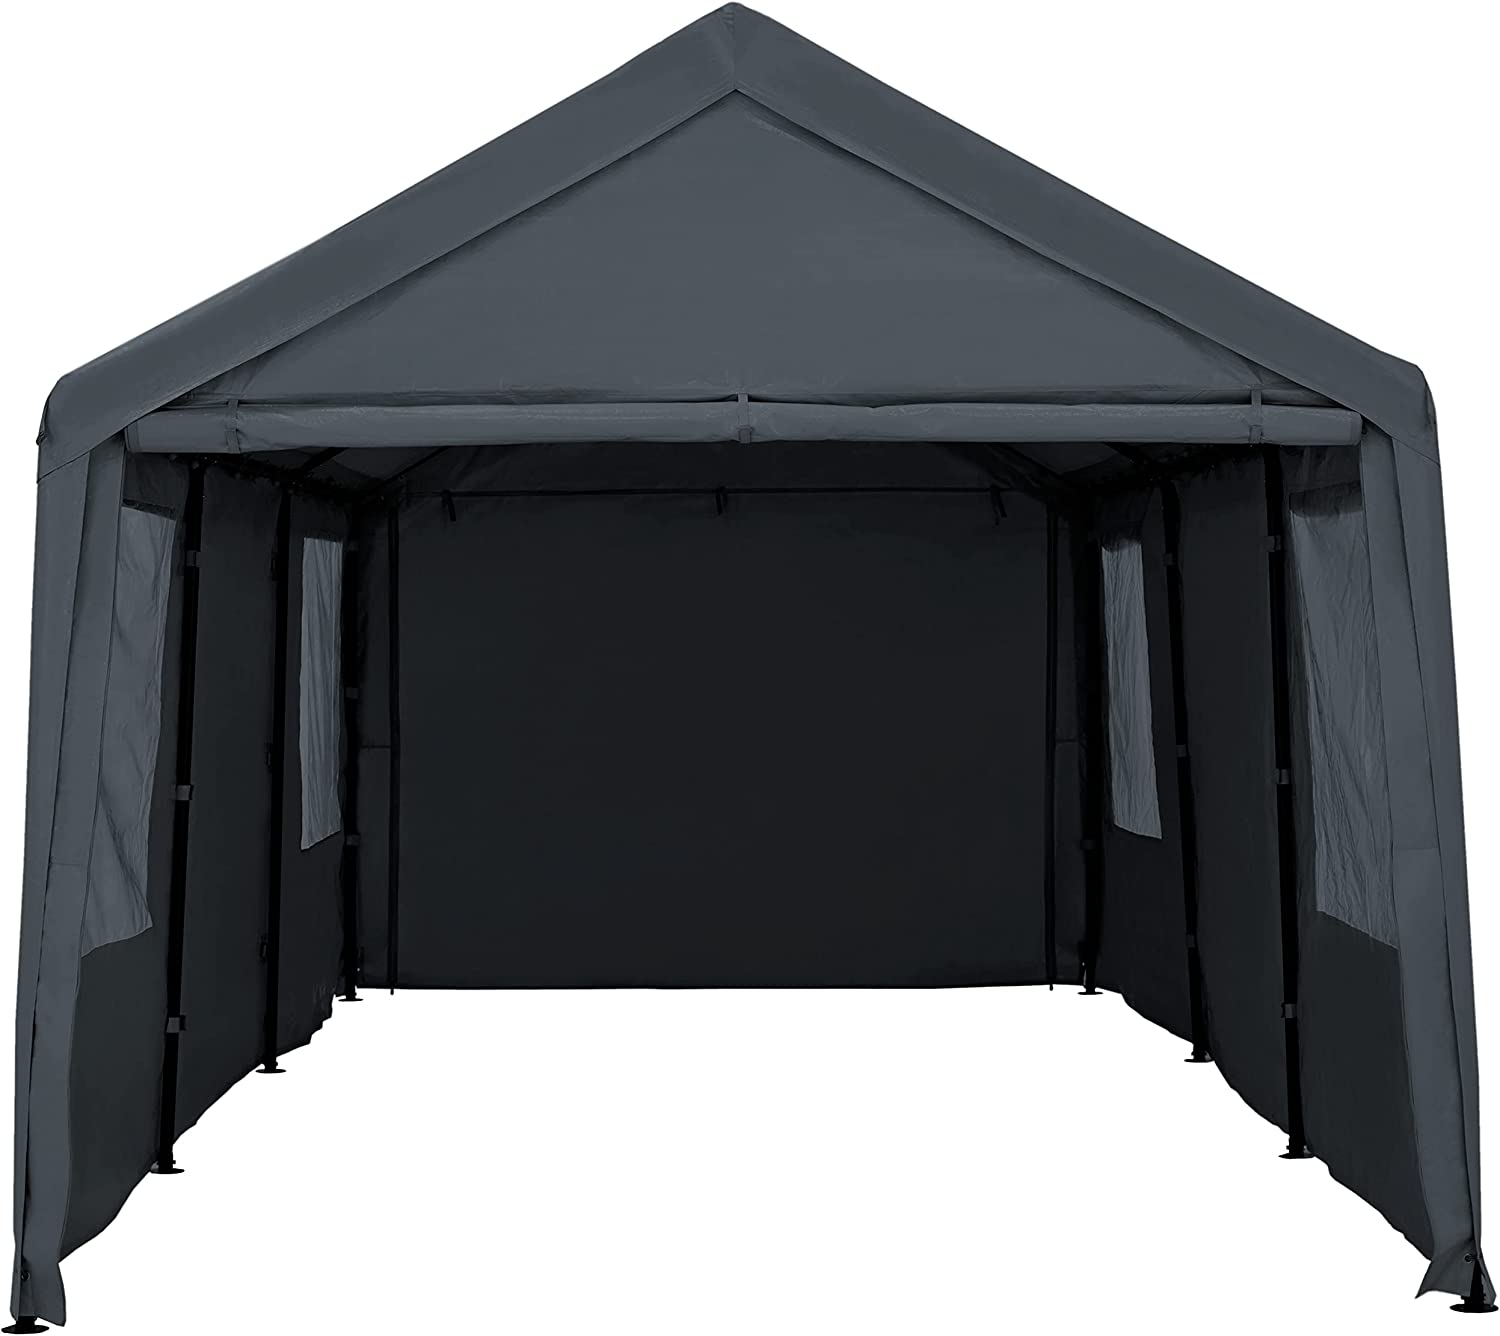 NOWENSOL Easy Assemble Extra Thick Canopy Tent With Sidewalls